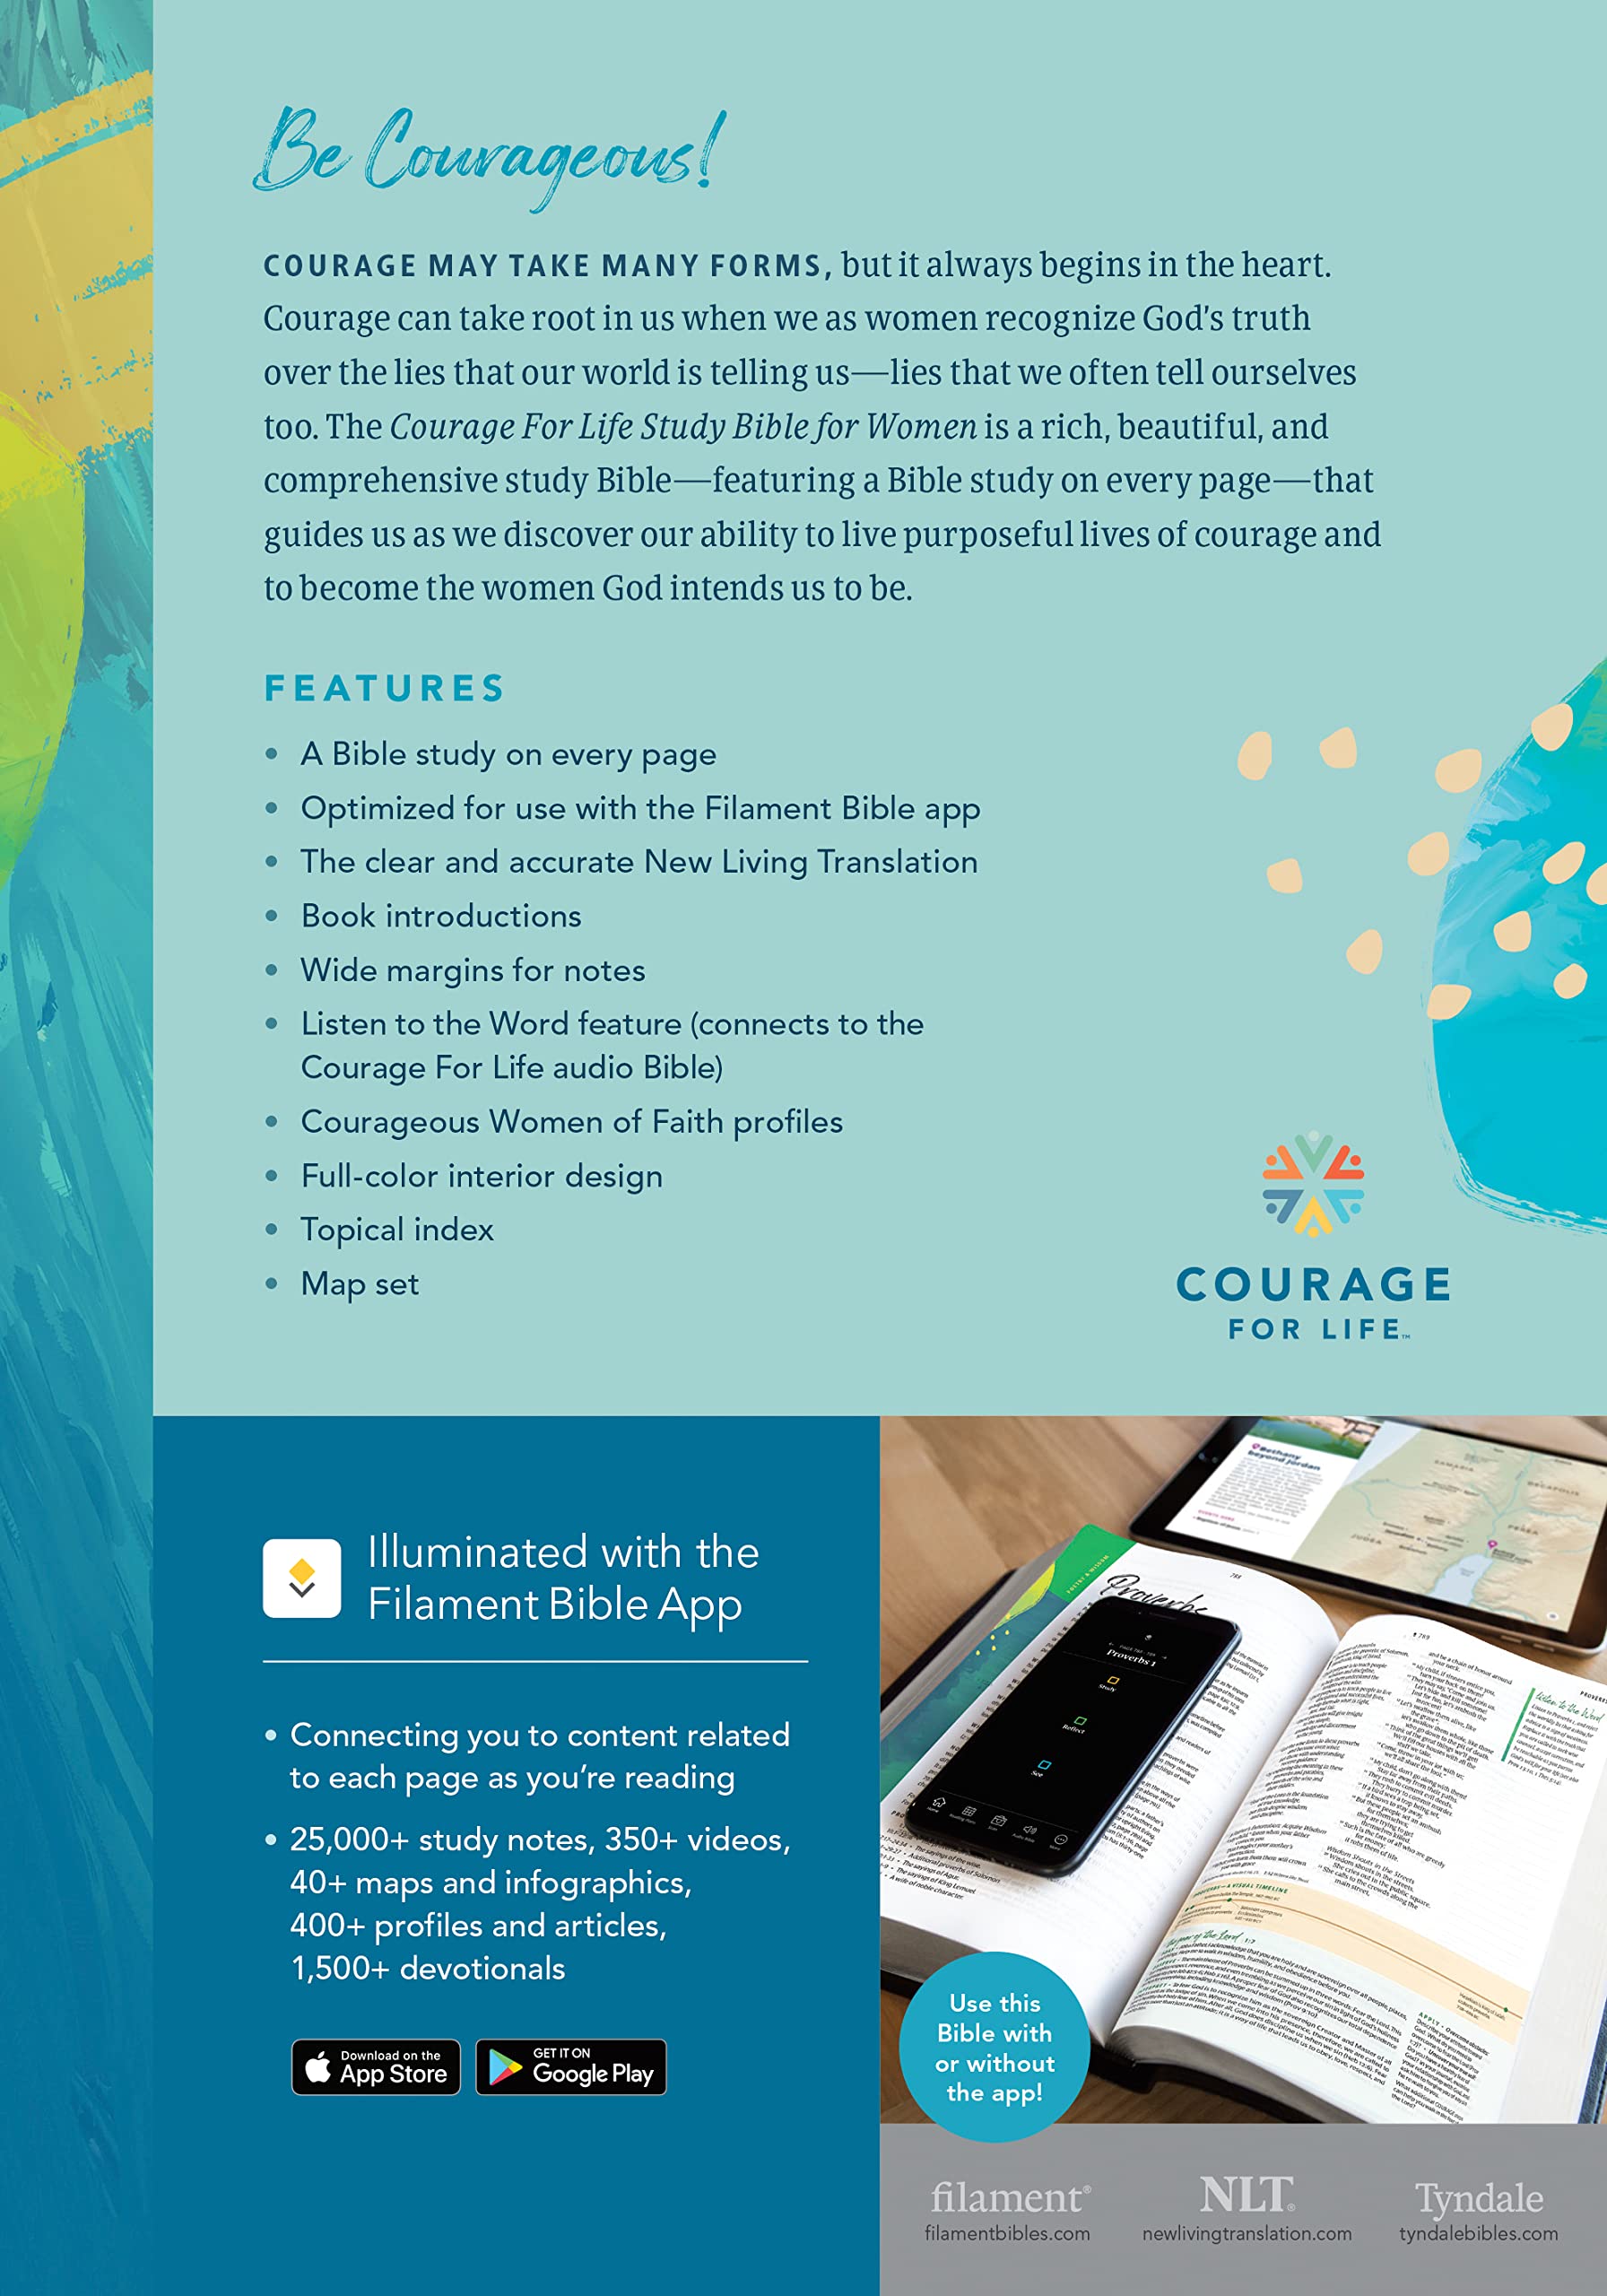 NLT Courage For Life Study Bible for Women (Hardcover, Filament Enabled)